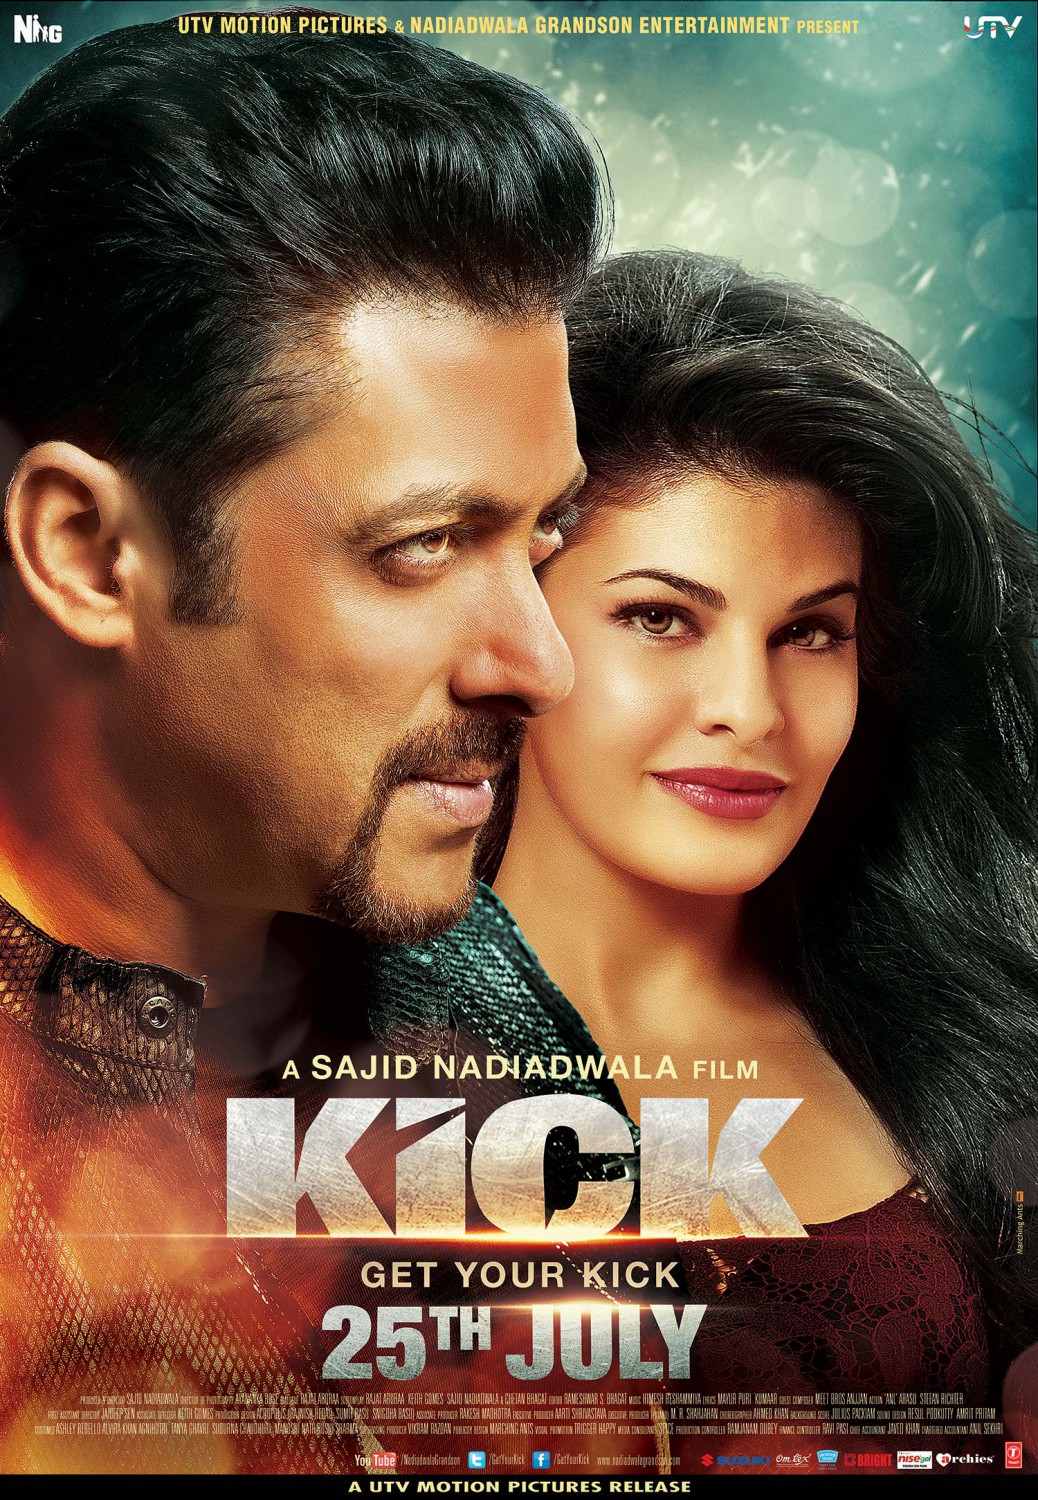 Extra Large Movie Poster Image for Kick (#6 of 12)